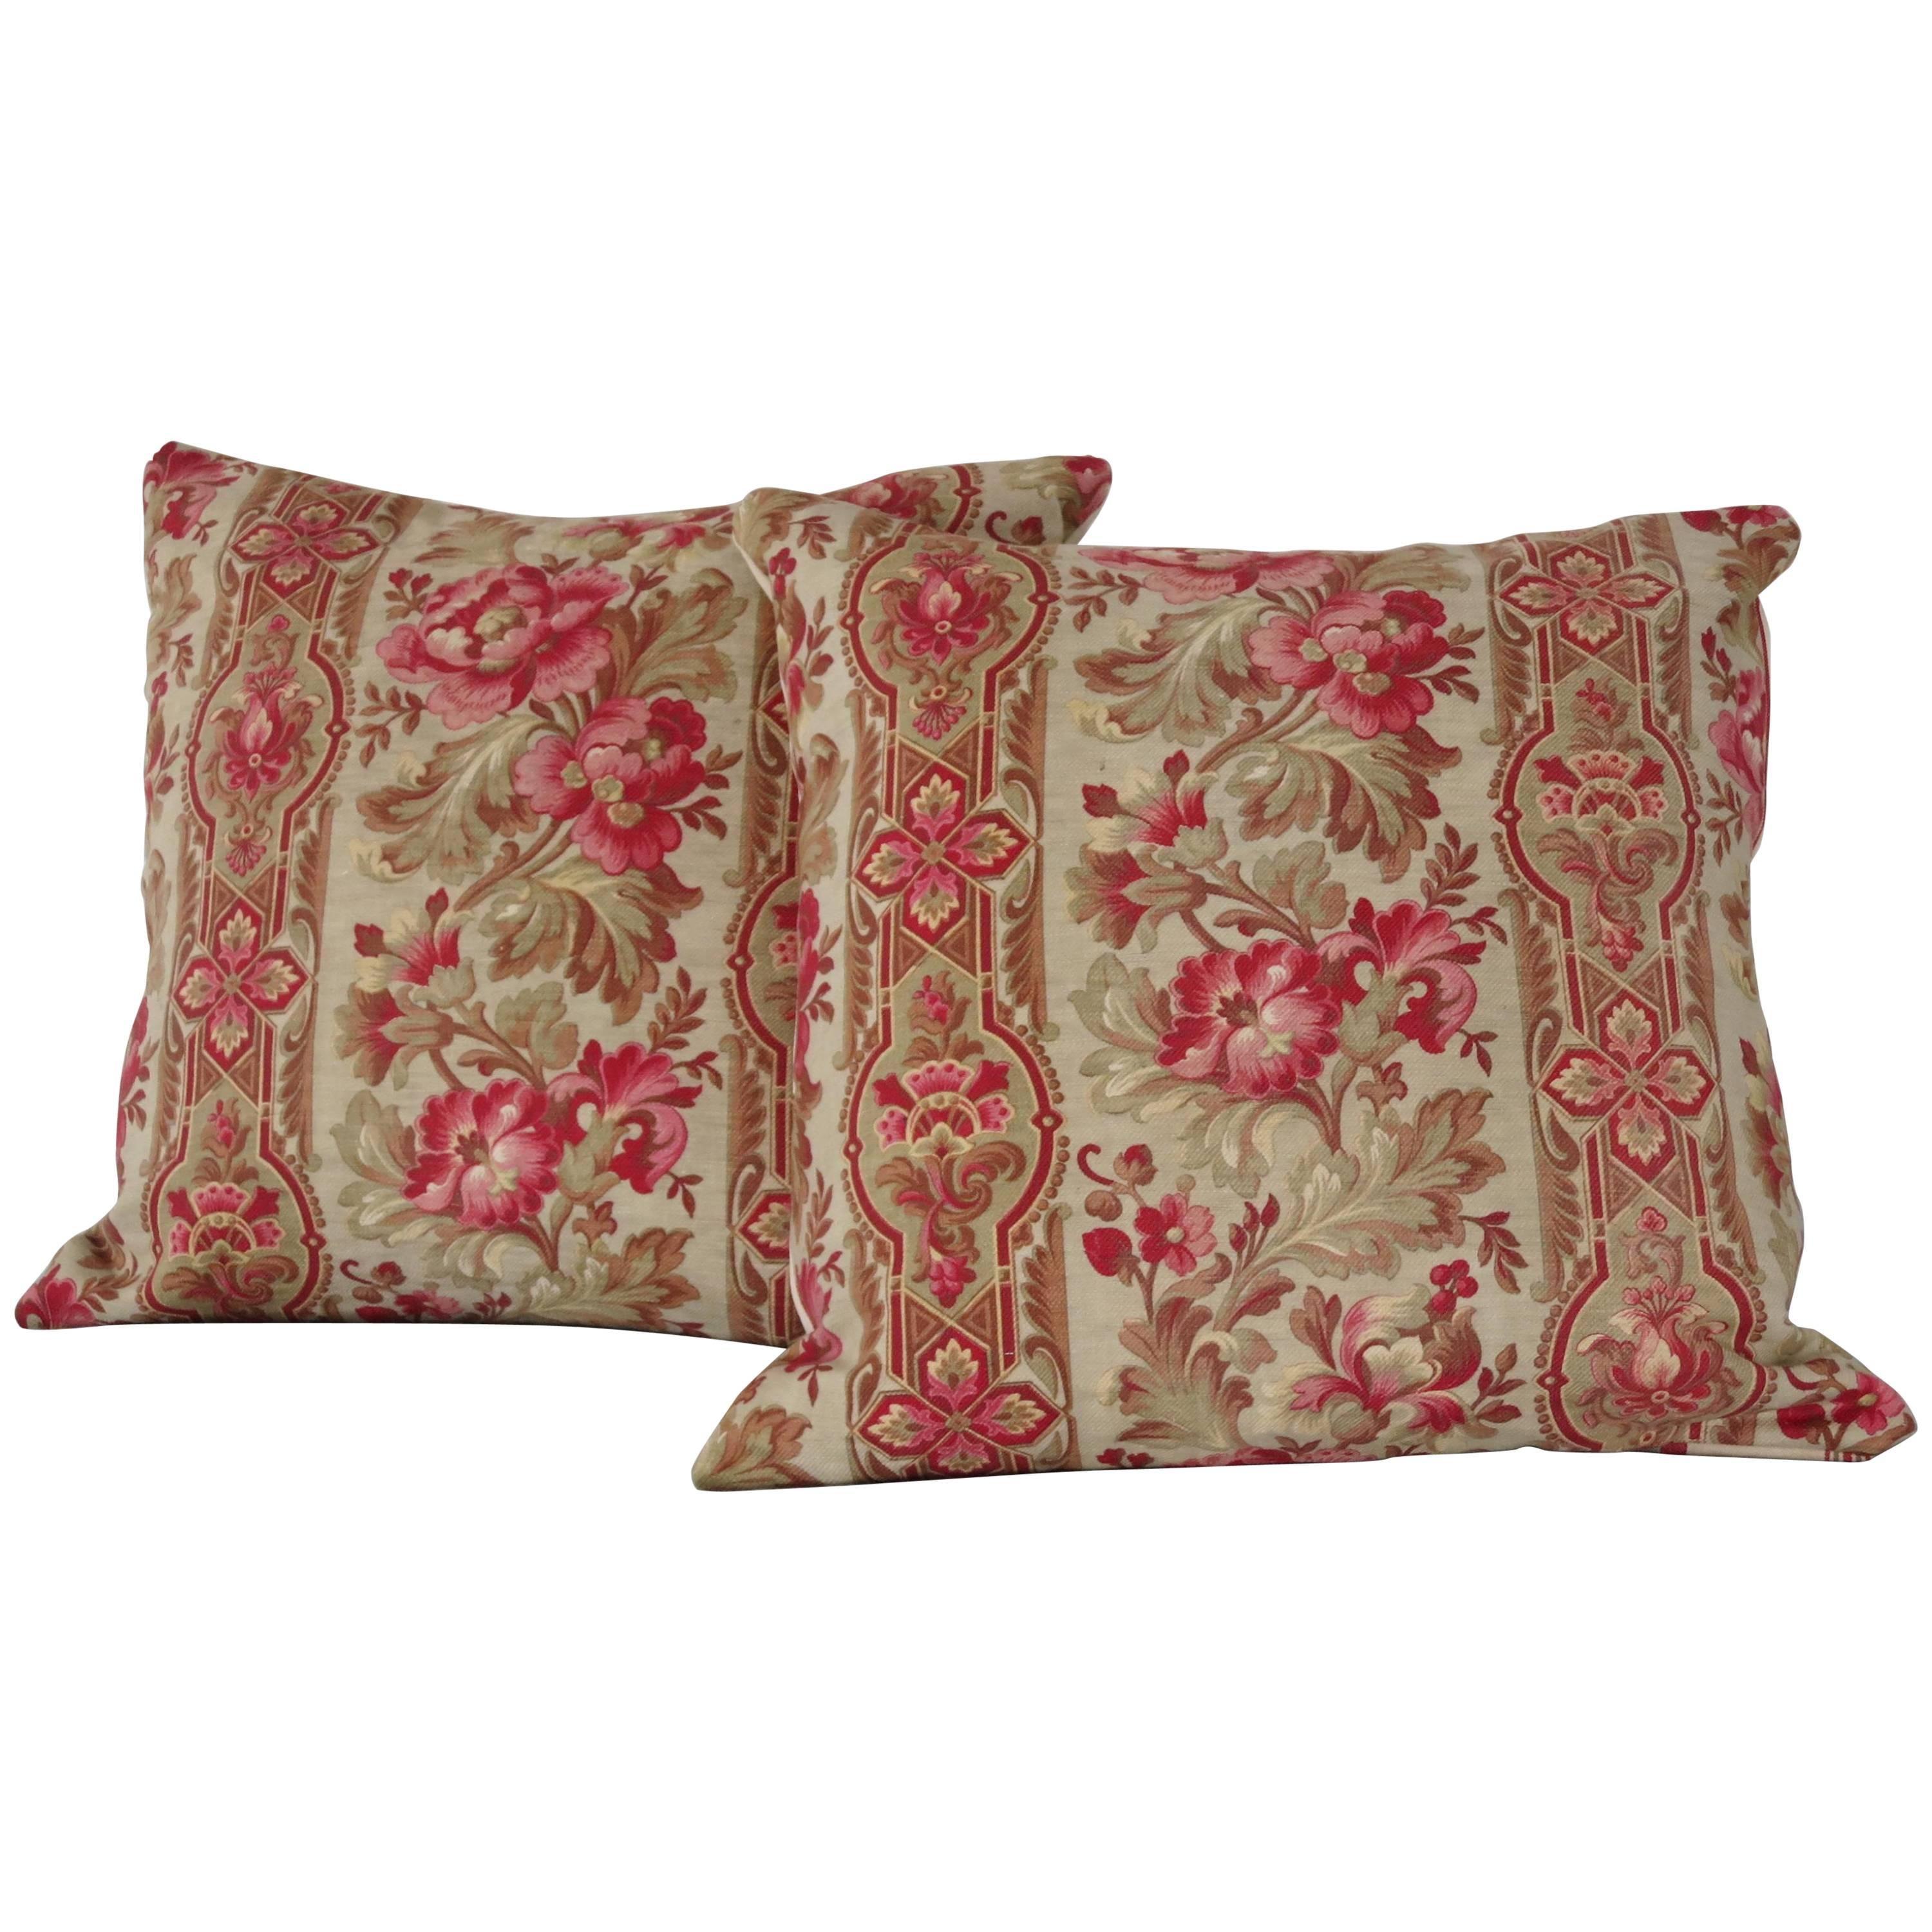 Pair of 19th Century French Floral and Ticking Pillows